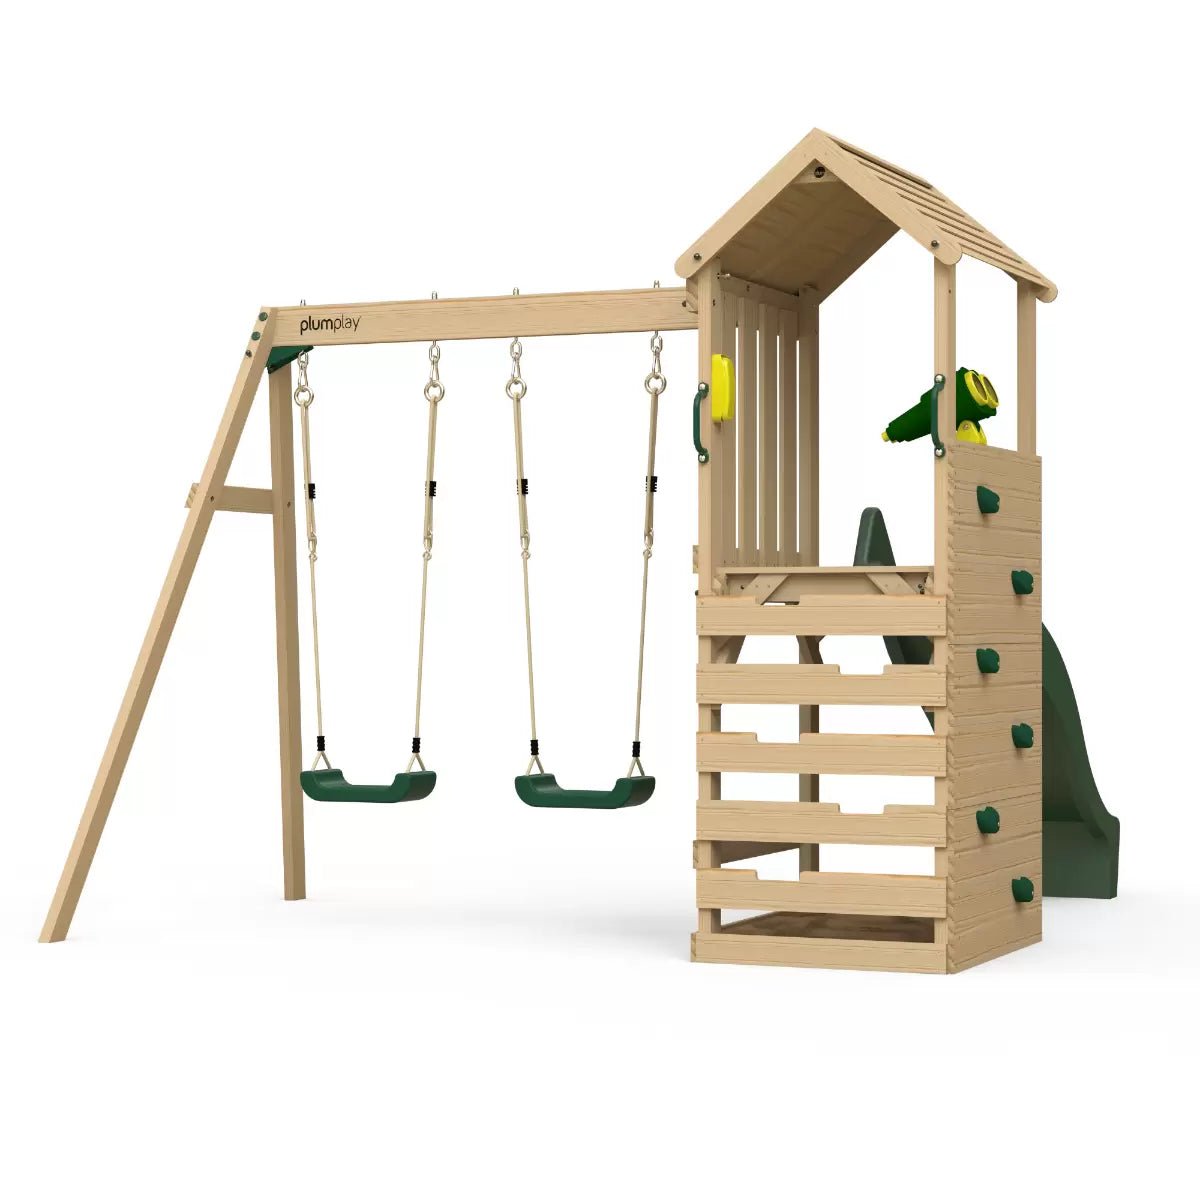 Shop Now at Kids Mega Mart for Plum Play Lookout Tower